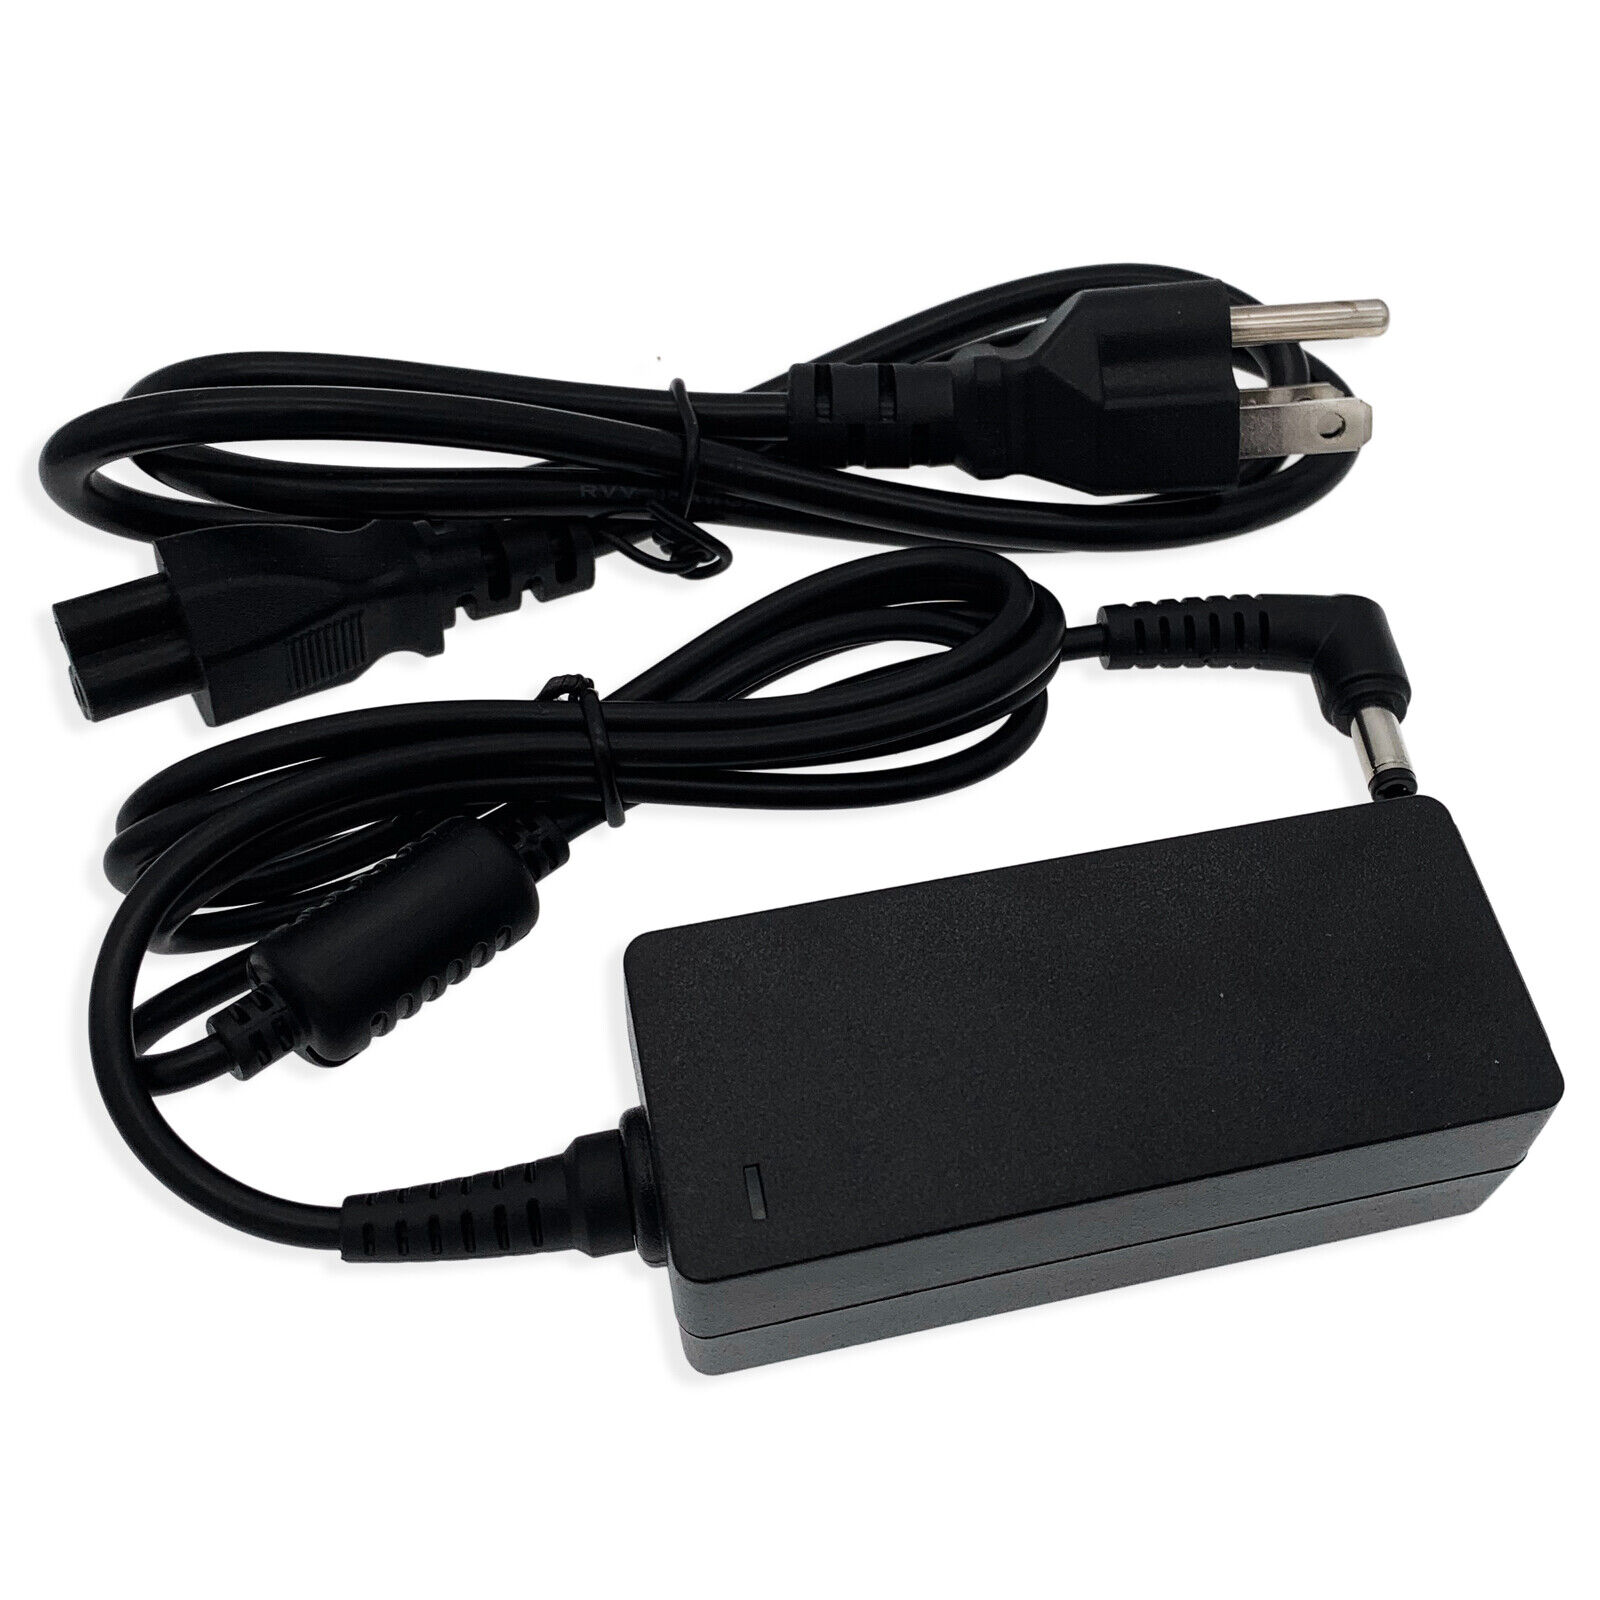 New Genuine Arris NBS42C120350M2 AC Adapter Switch Mode 12V 3.5A 42W OEM n/PC Compatible Brand Arris Brand ARRIS Type P